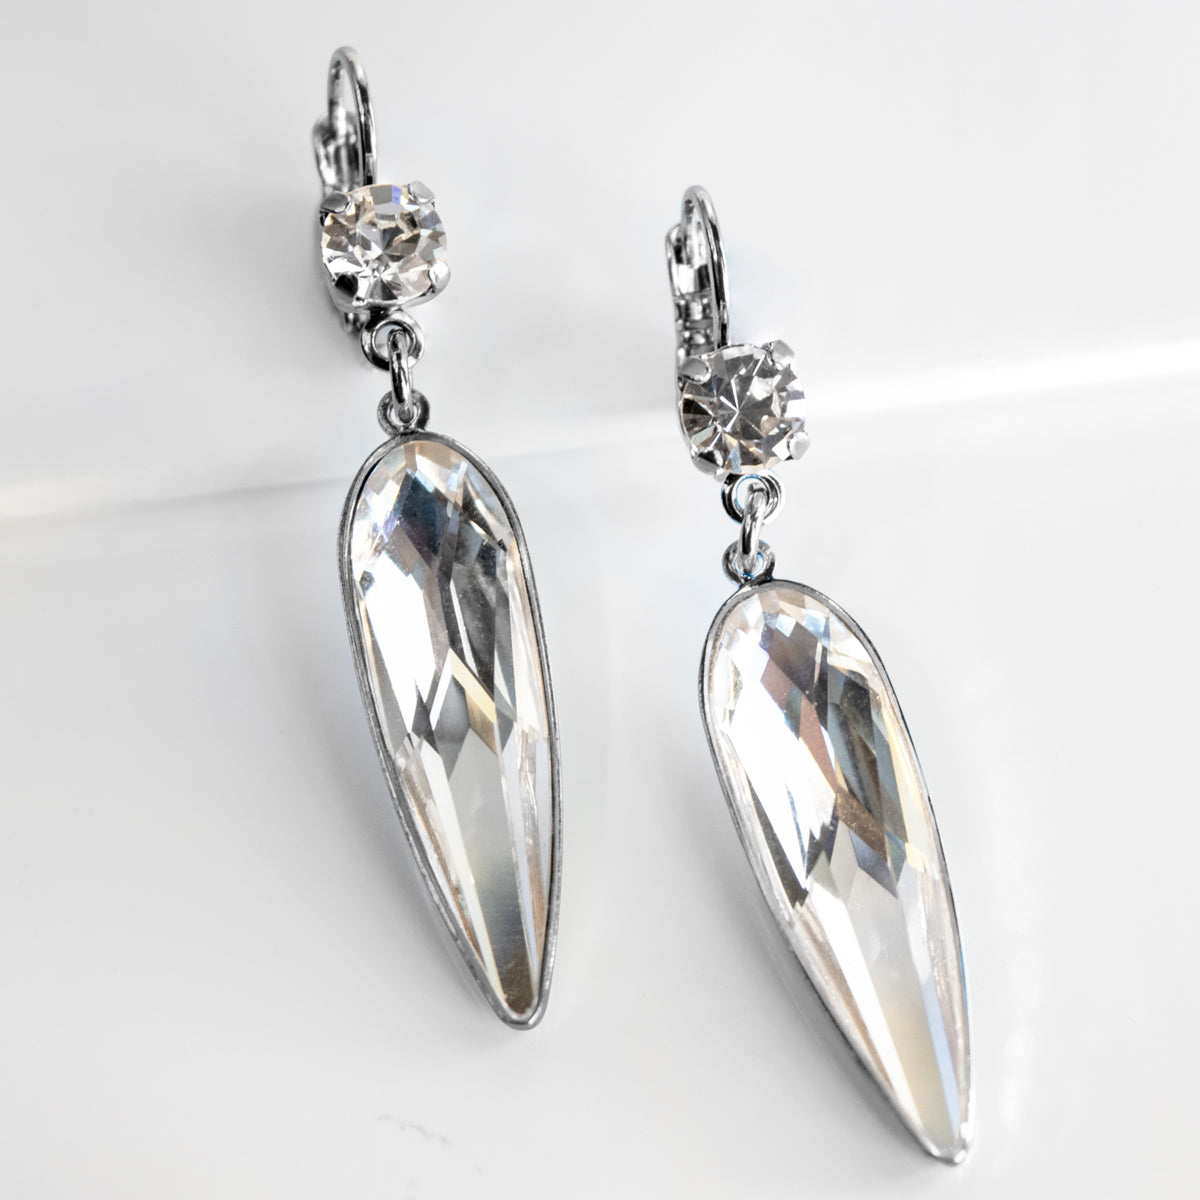 Mariana "On a Clear Day" Earrings